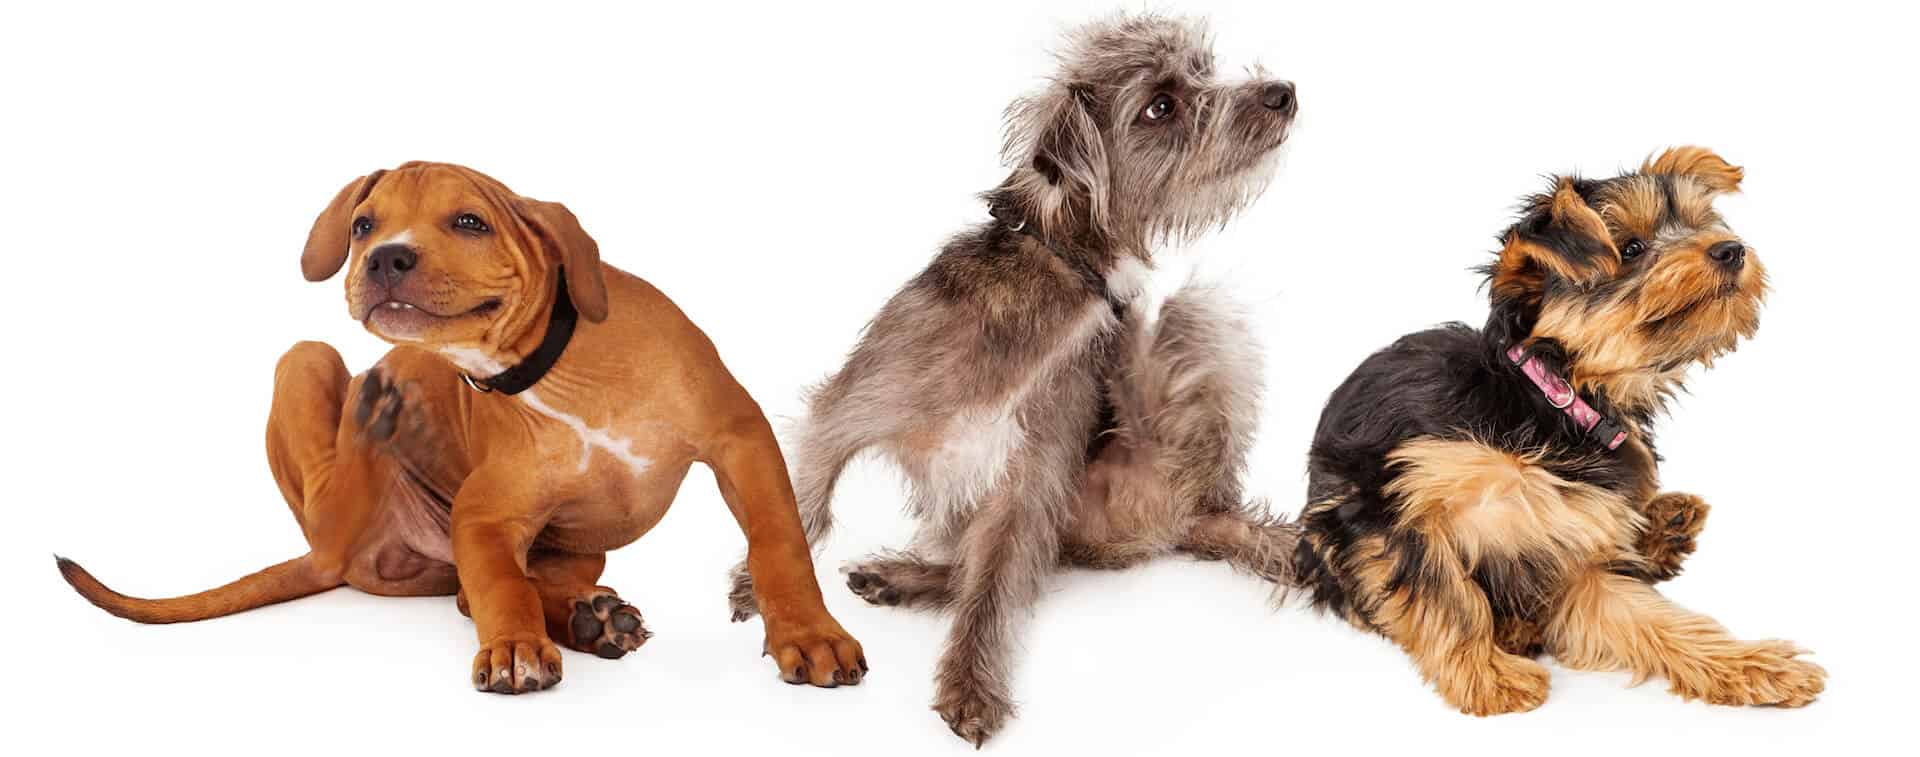 3 pets scratching themselves potentially because of pet dander, dust and dog hair problems